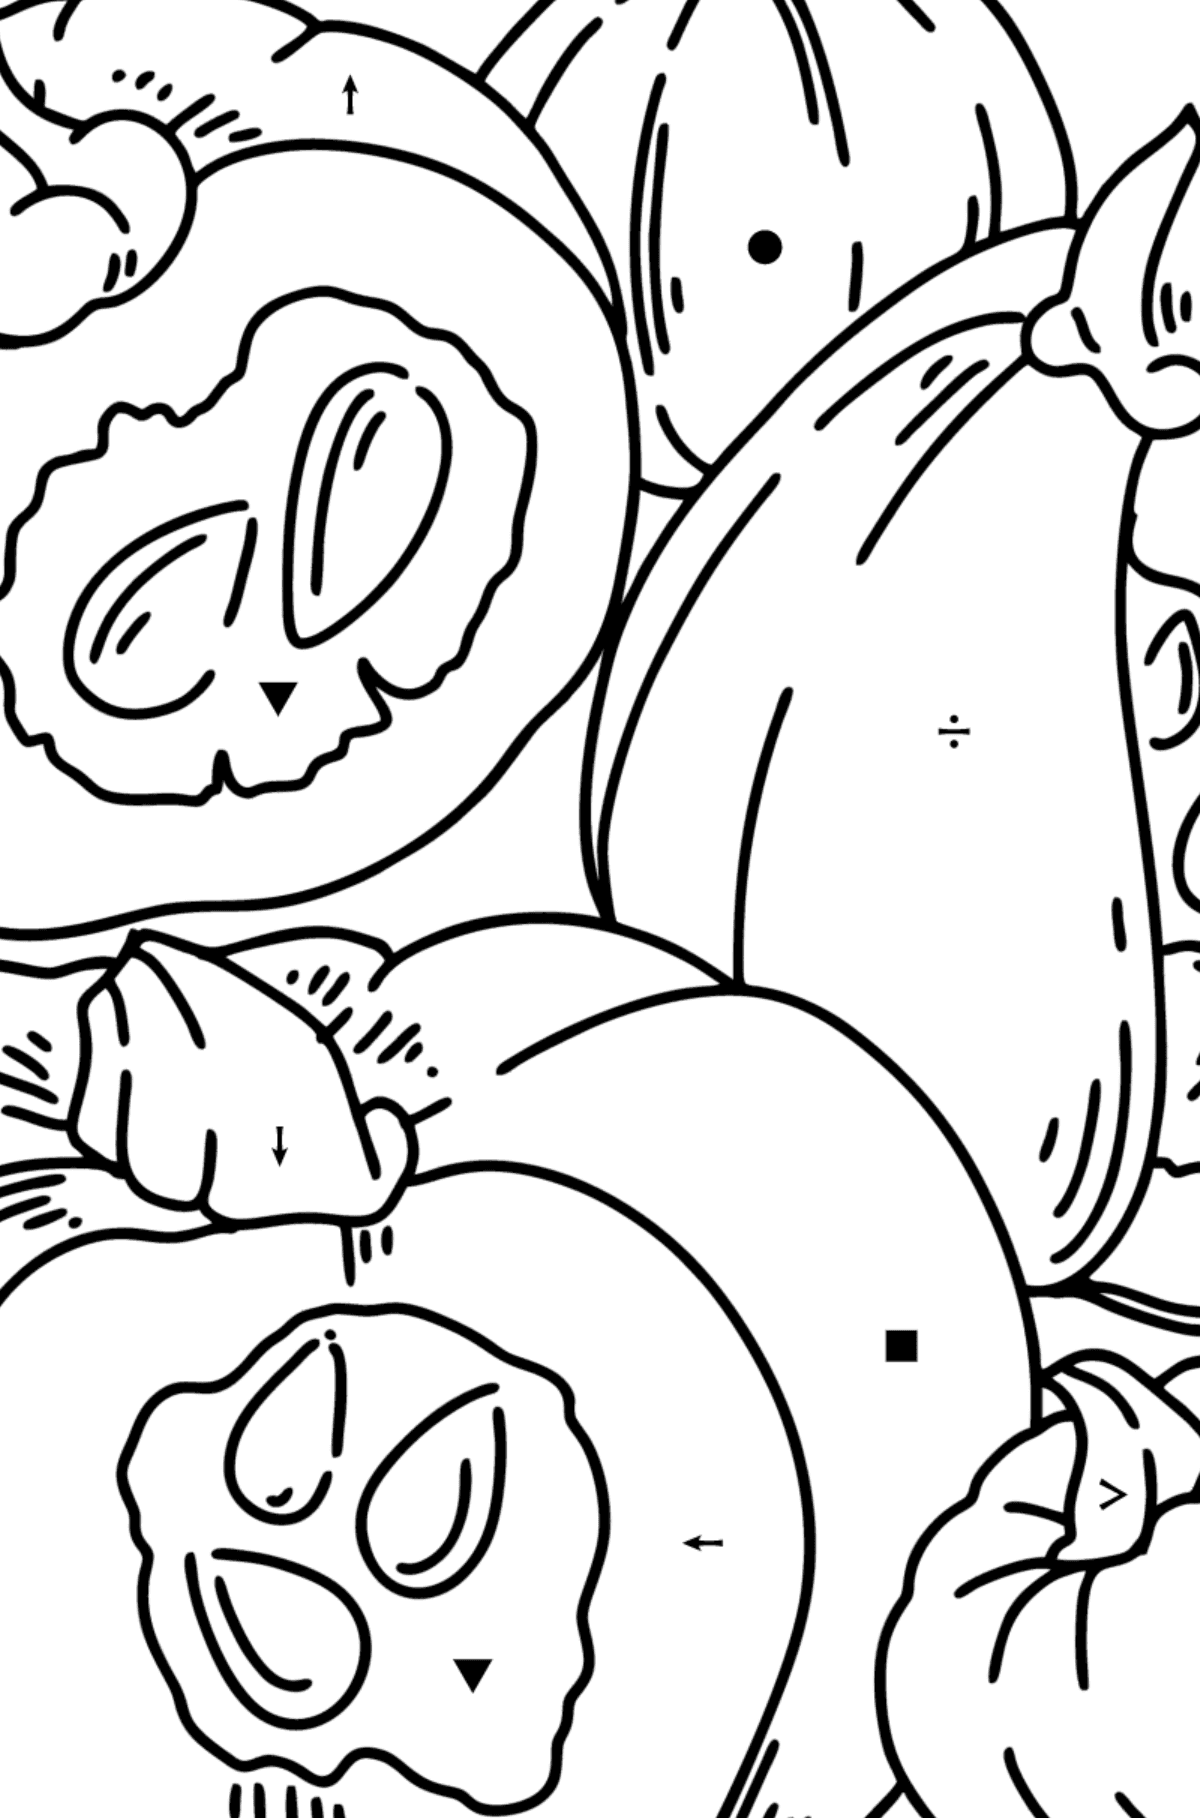 Coloring page Autumn - Pumpkin harvest - Coloring by Symbols for Kids